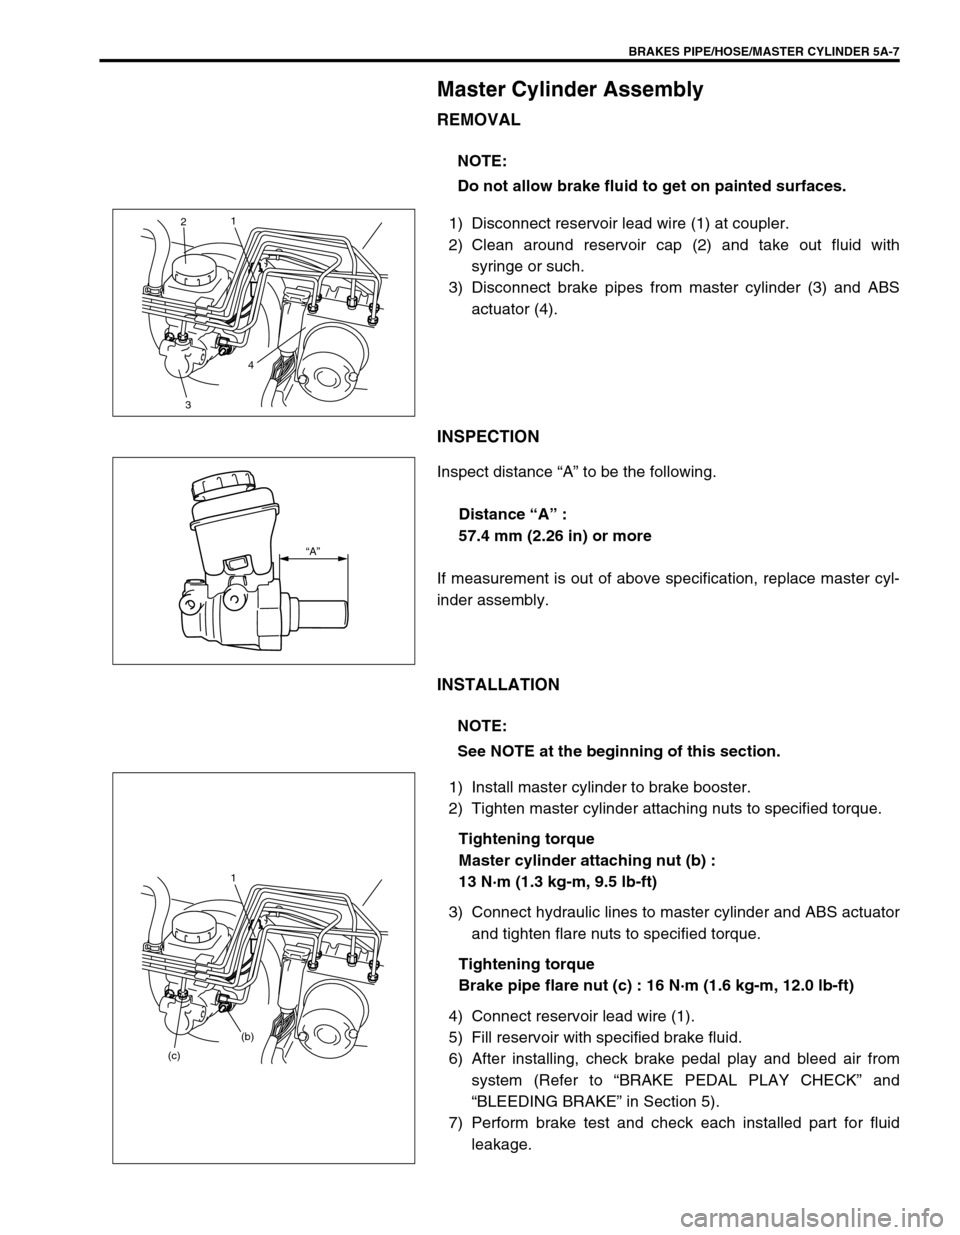 SUZUKI GRAND VITARA 1999 2.G Owners Manual BRAKES PIPE/HOSE/MASTER CYLINDER 5A-7
Master Cylinder Assembly
REMOVAL
1) Disconnect reservoir lead wire (1) at coupler.
2) Clean around reservoir cap (2) and take out fluid with
syringe or such.
3) D